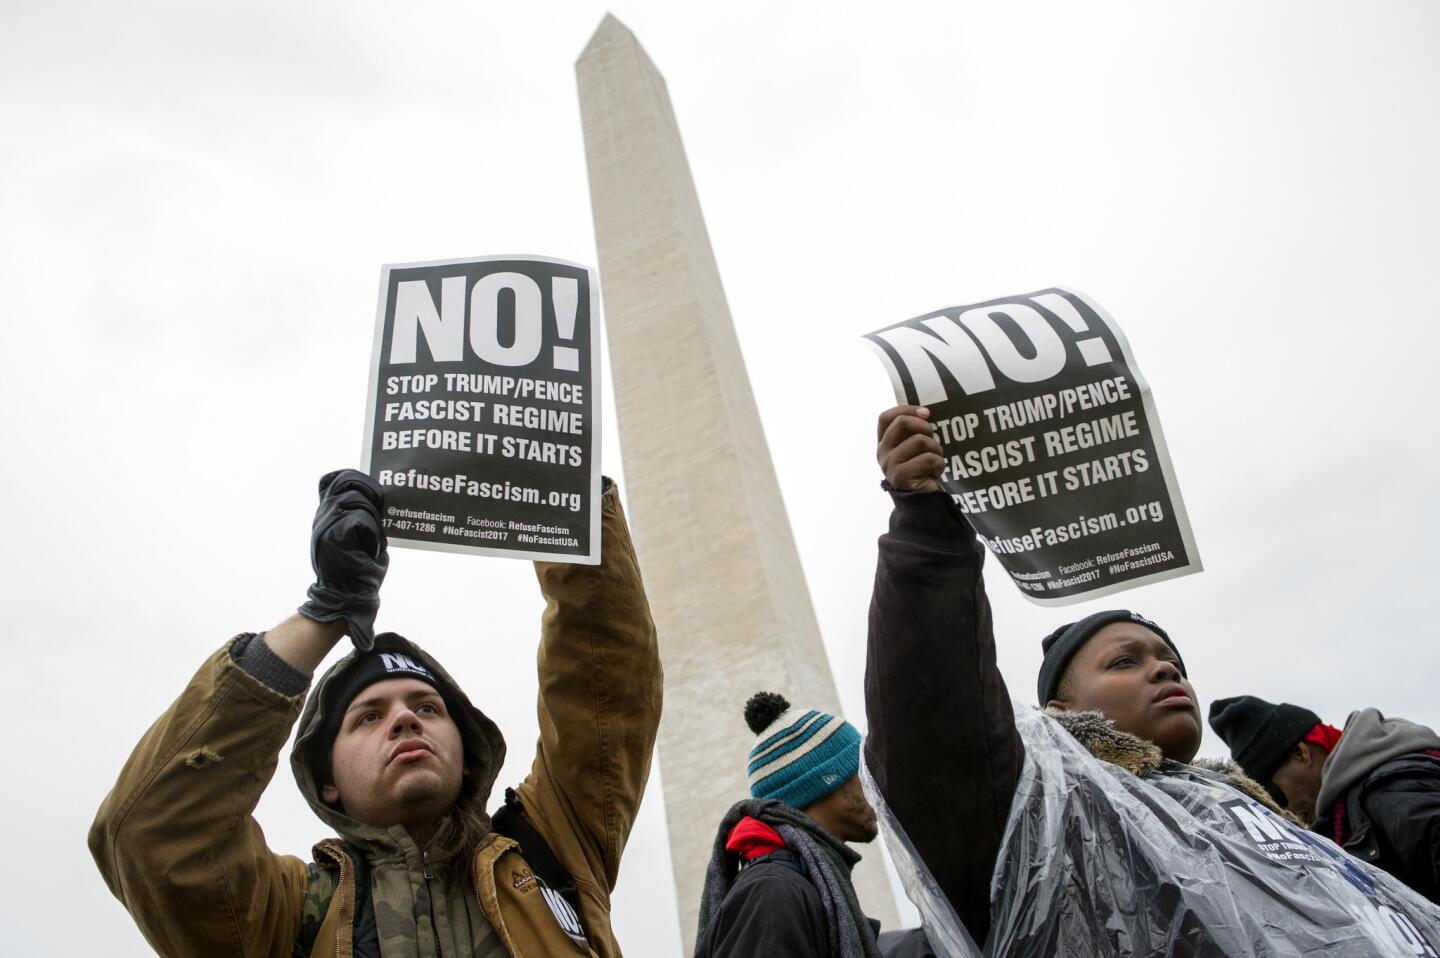 Civil rights advocates demonstrate on the Washington Monument grounds before marching to honor the Rev. Martin Luther King, Jr. in Washingtonon Jan. 14, 2017.